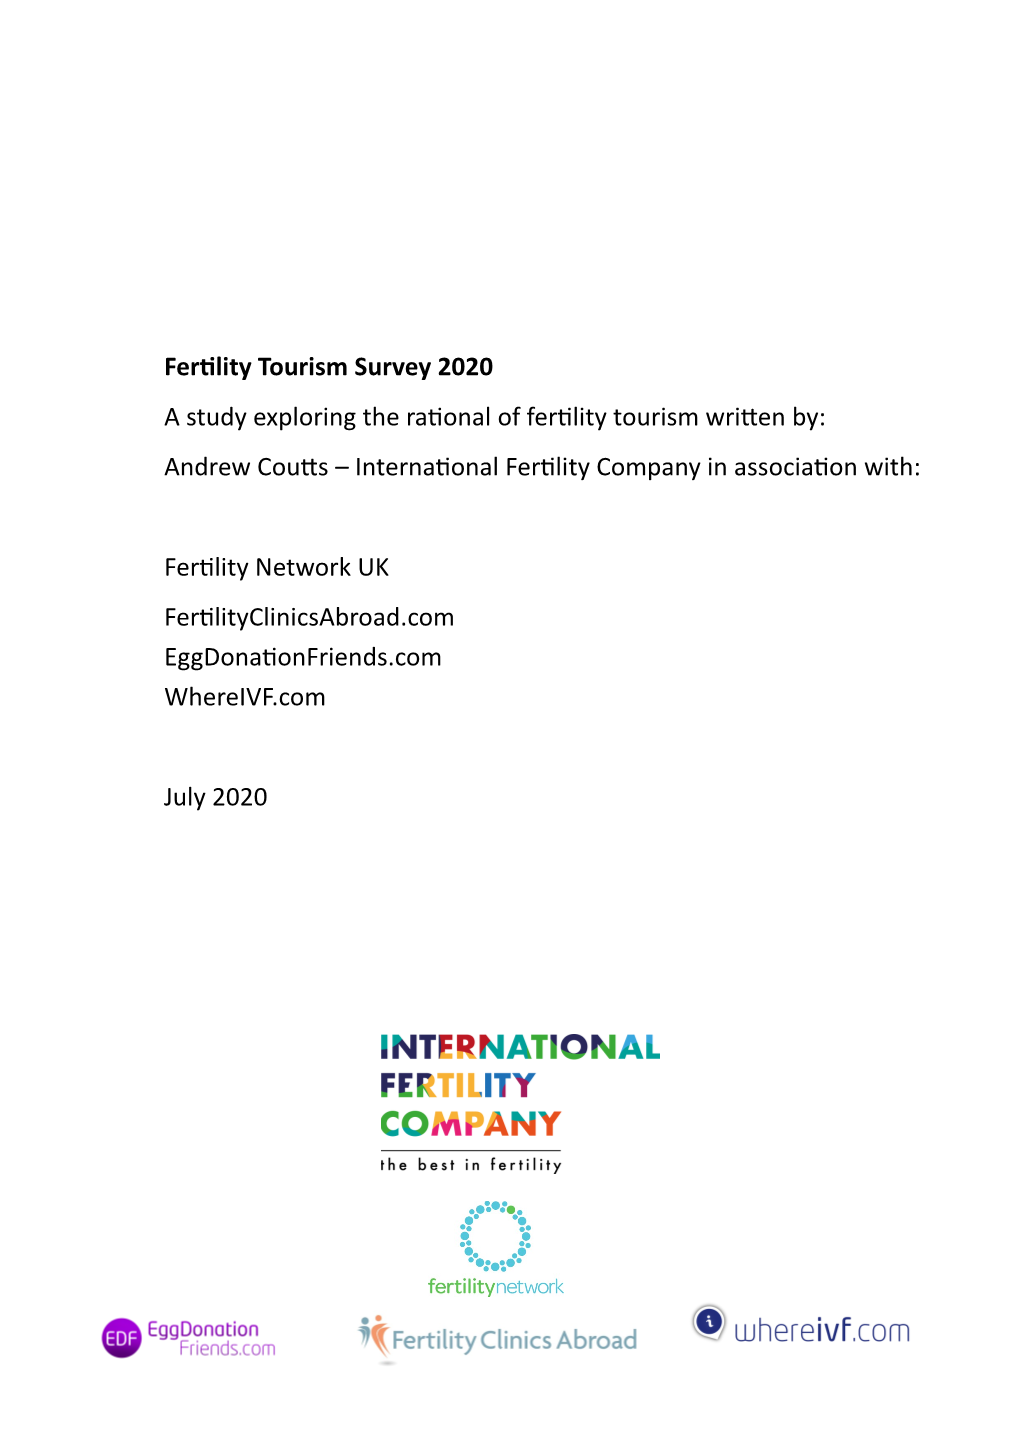 Andrew Coutts – International Fertility Company in Association With